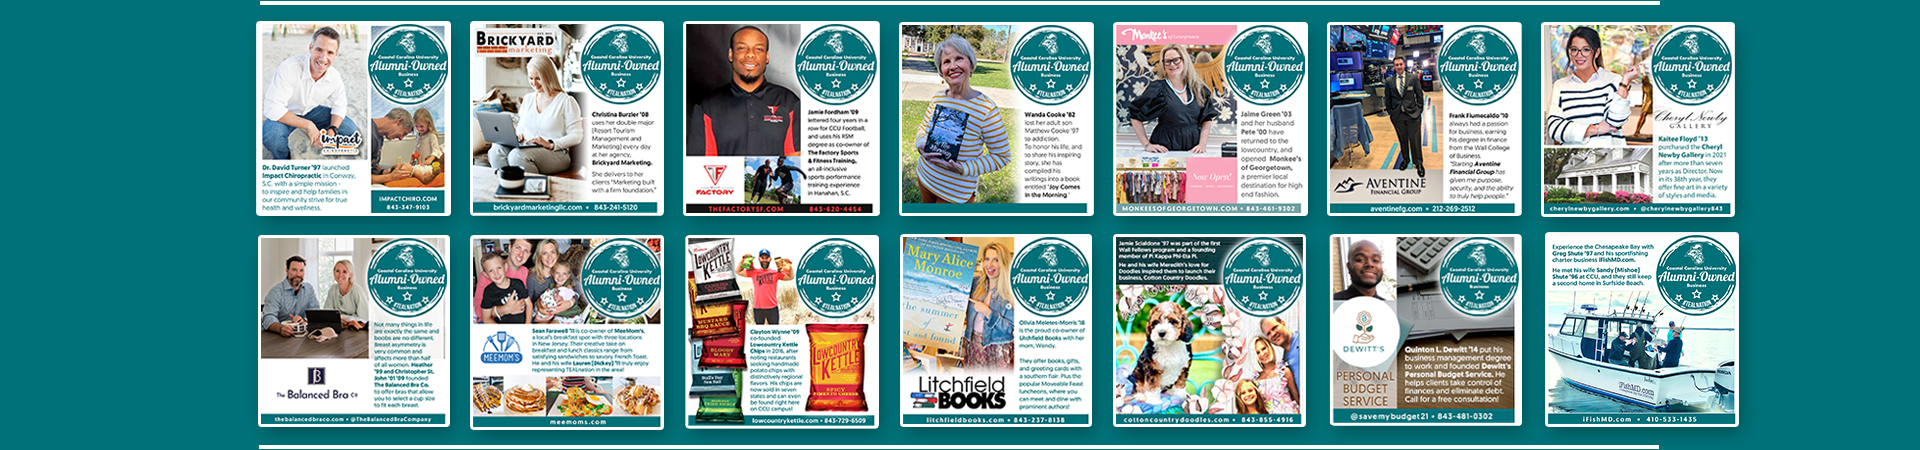 May examples of CCU alumni-owned businesses